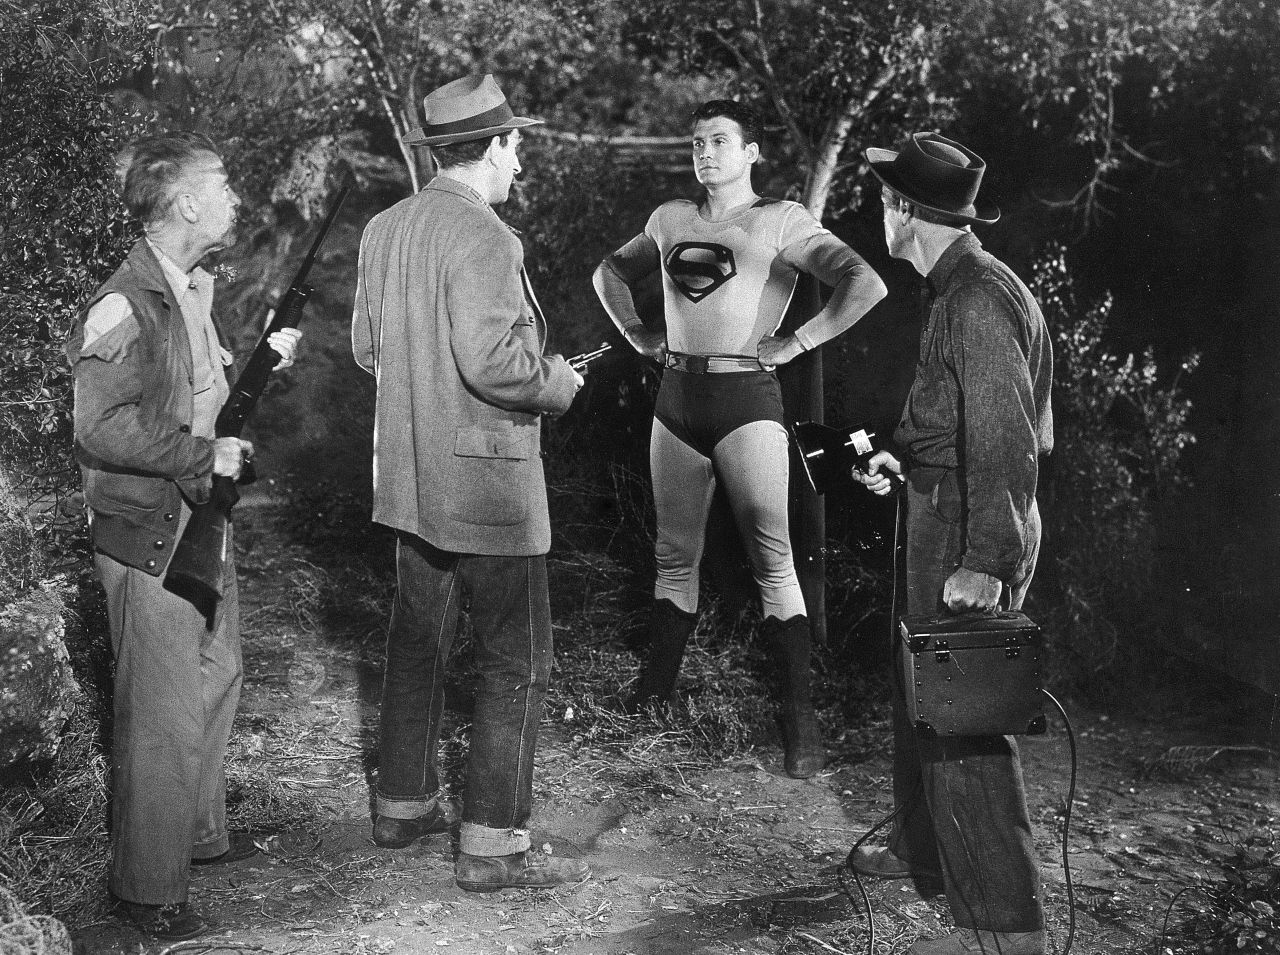 Reeves continues to play Superman in the 1950s syndicated television series "Adventures of Superman."